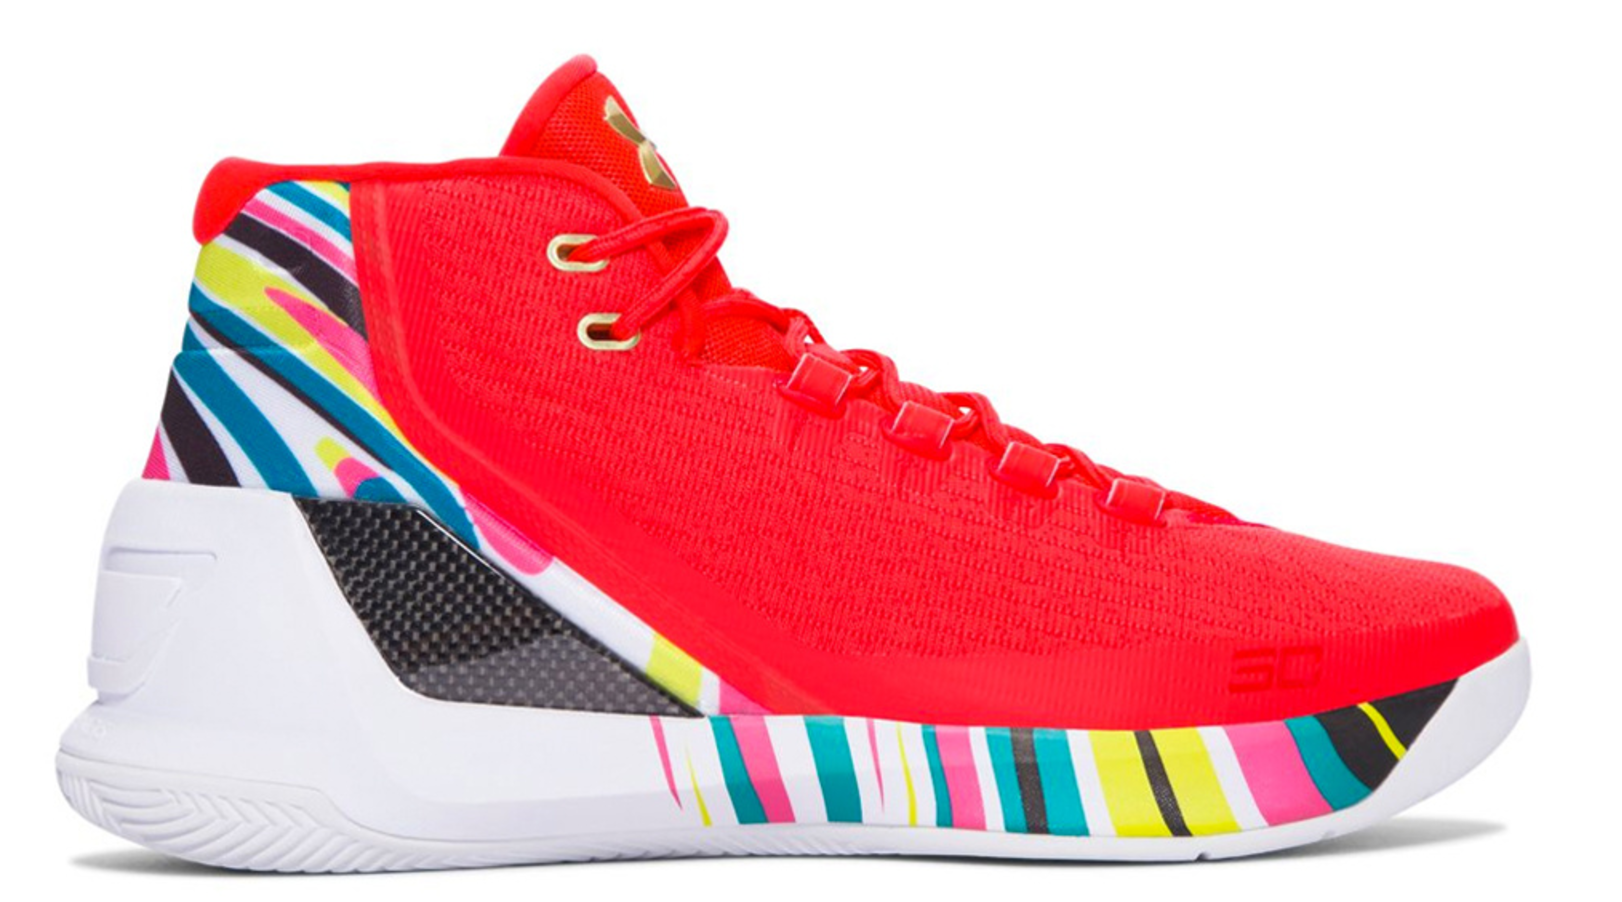 Under armor Stephen curry 3s shoe